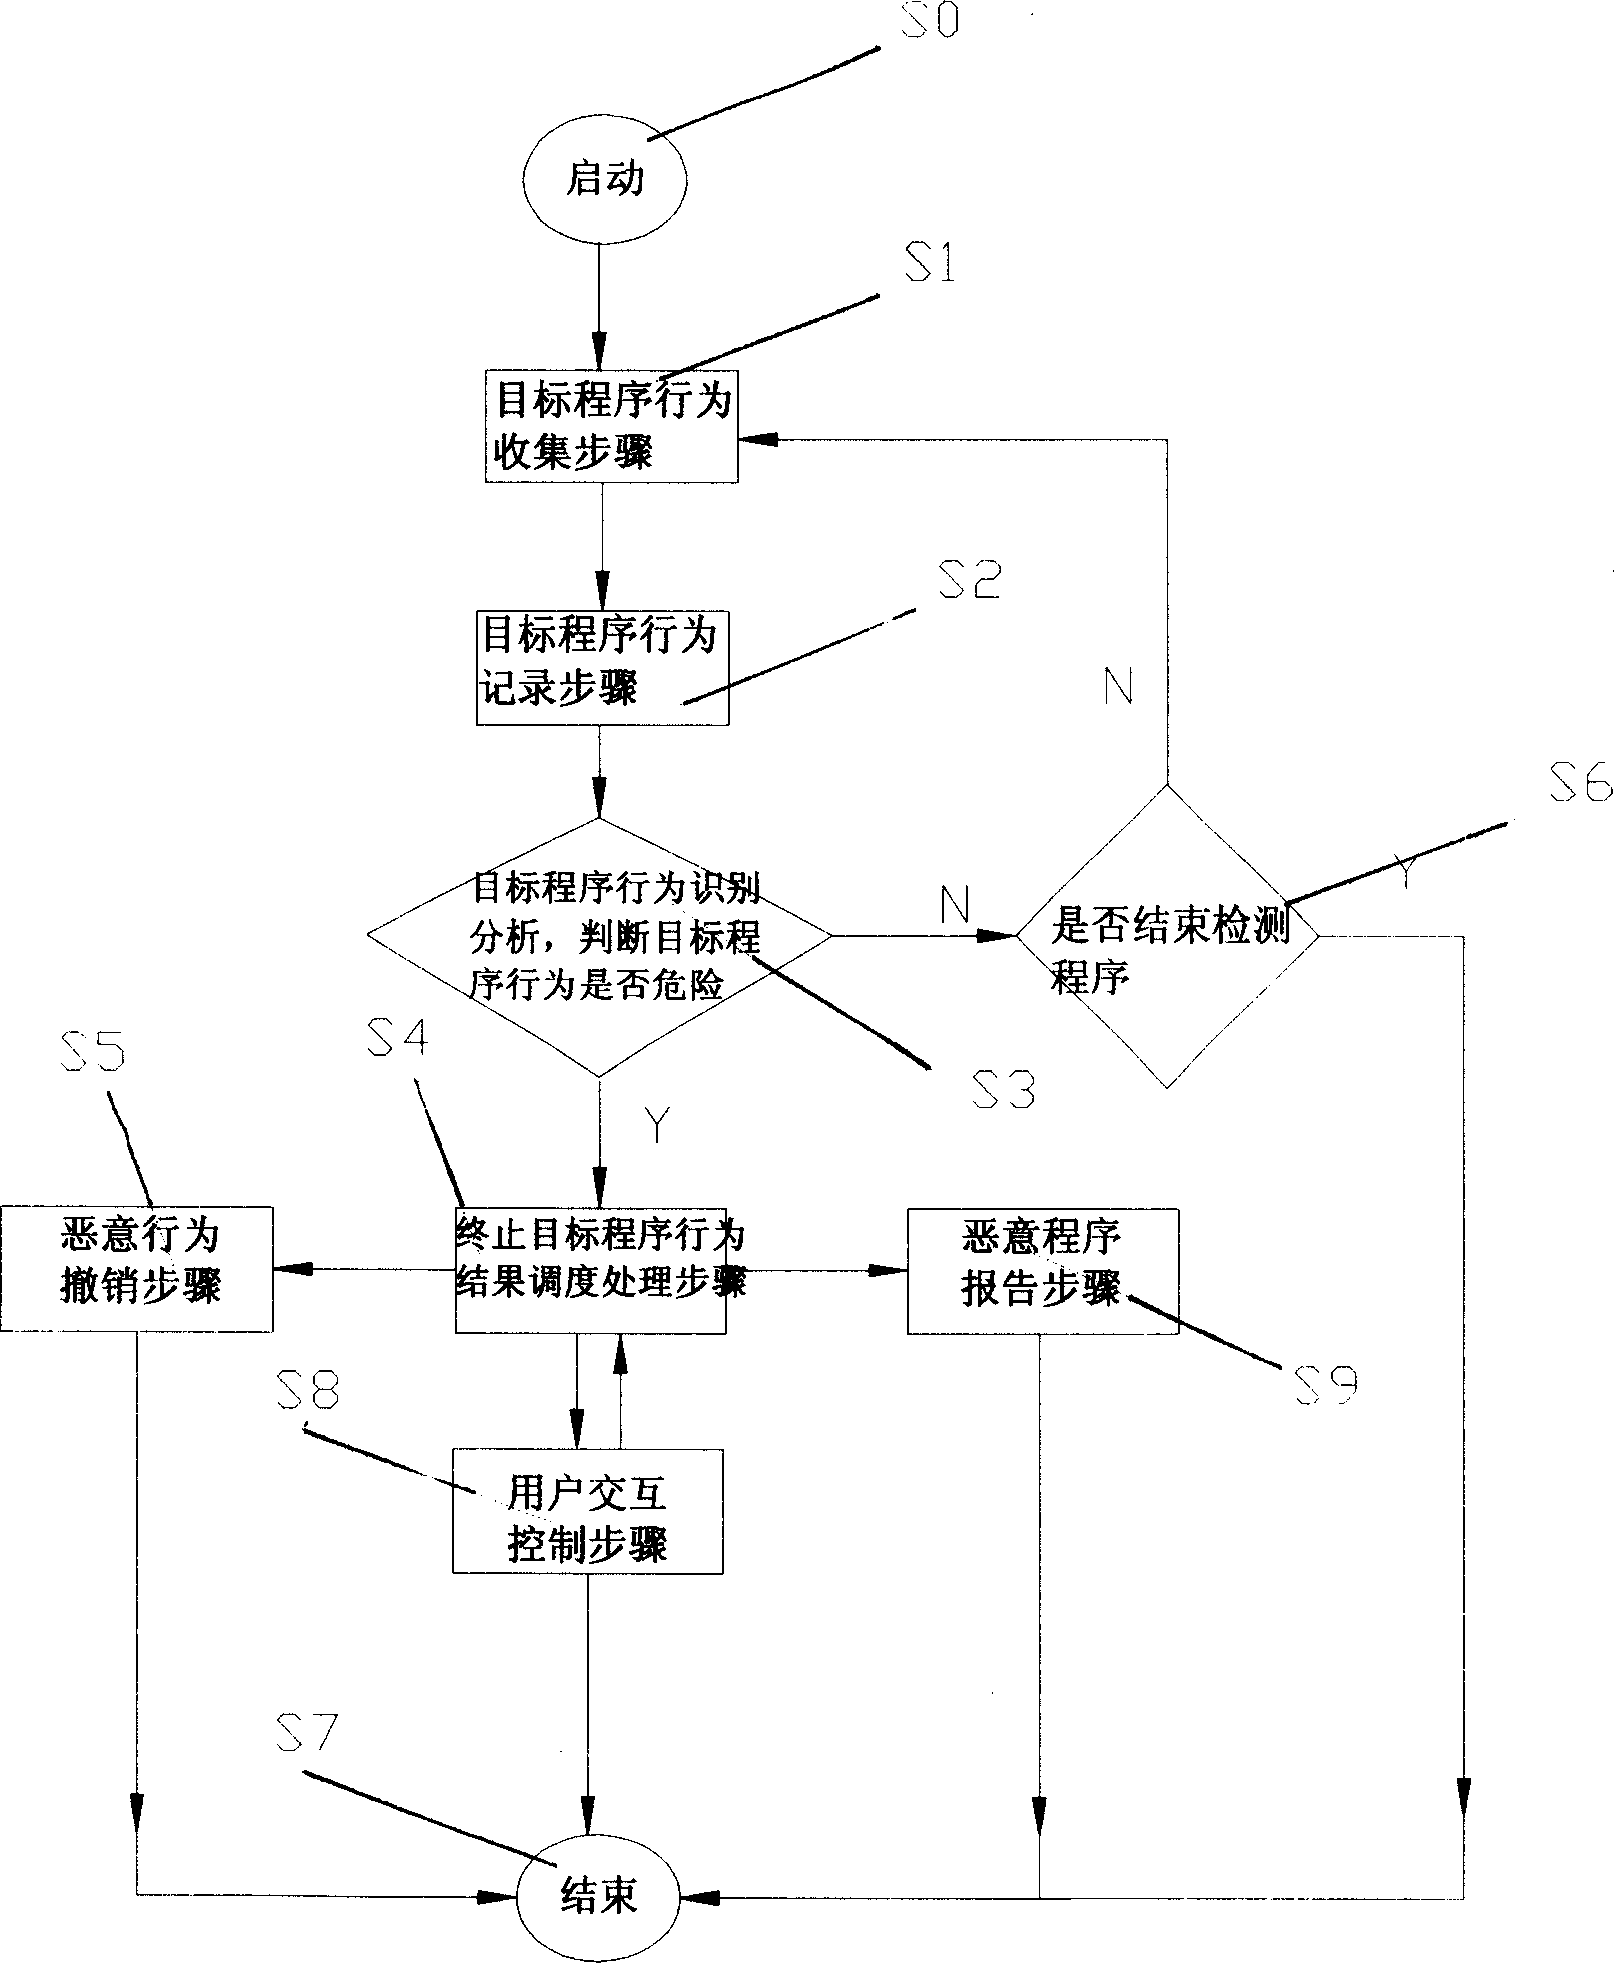 System and method for detecting and defending computer worm